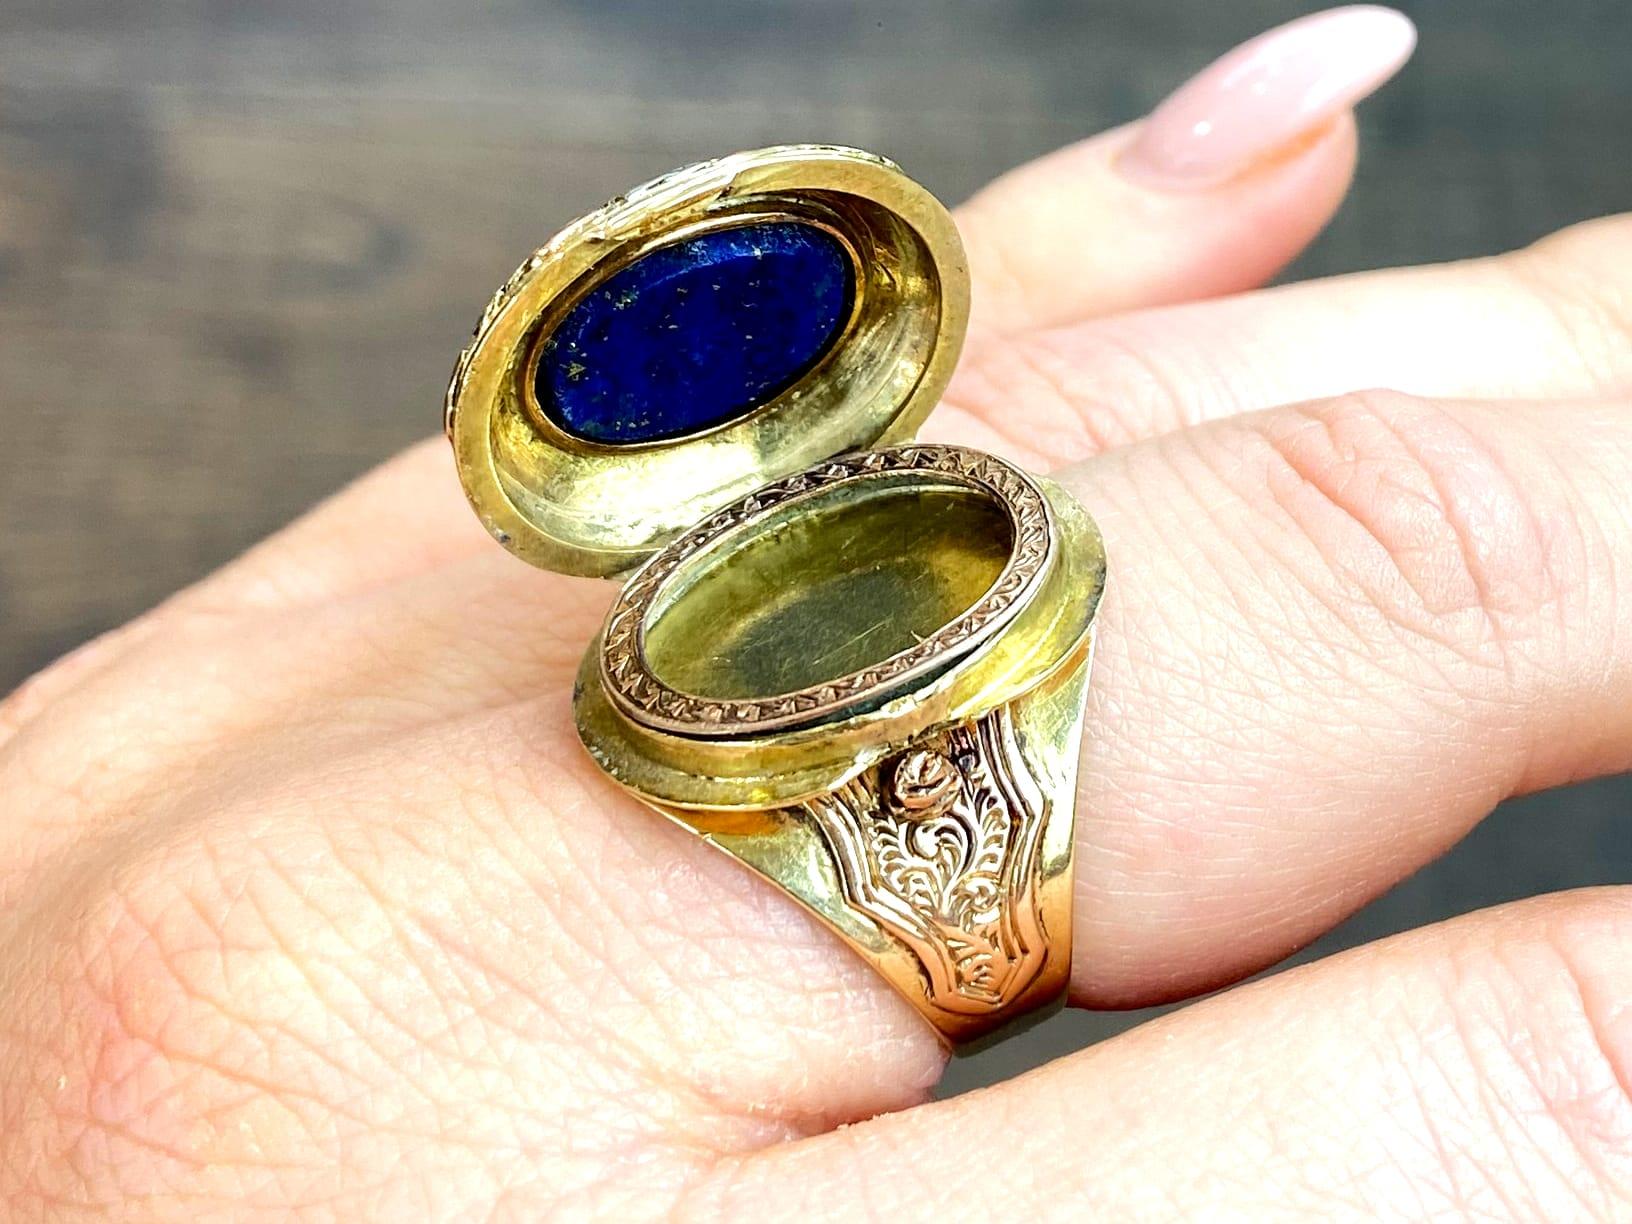 Antique 3.02Ct Lapis Lazuli and 15k Yellow Gold Locket Ring Circa 1880 In Excellent Condition For Sale In Jesmond, Newcastle Upon Tyne